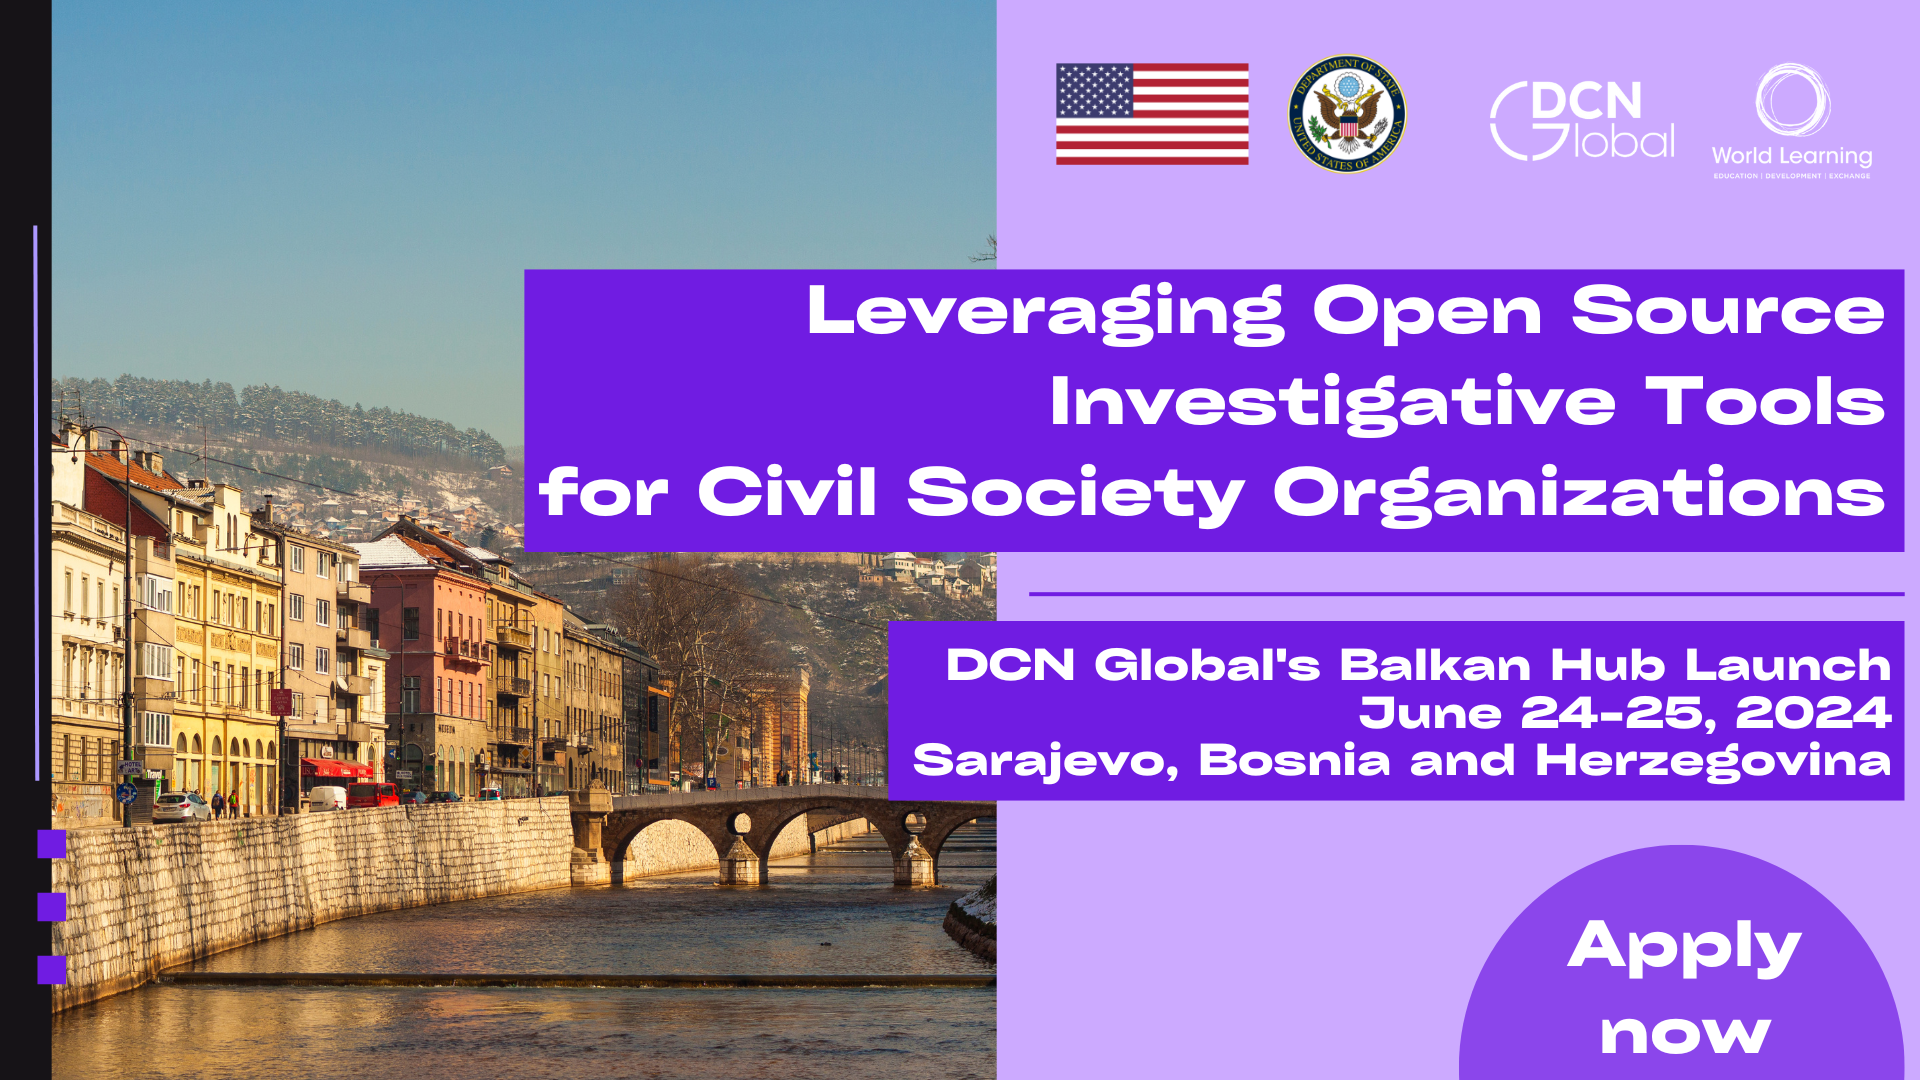 Leveraging Open Source Investigative Tools for Civil Society Organizations (CSOs)